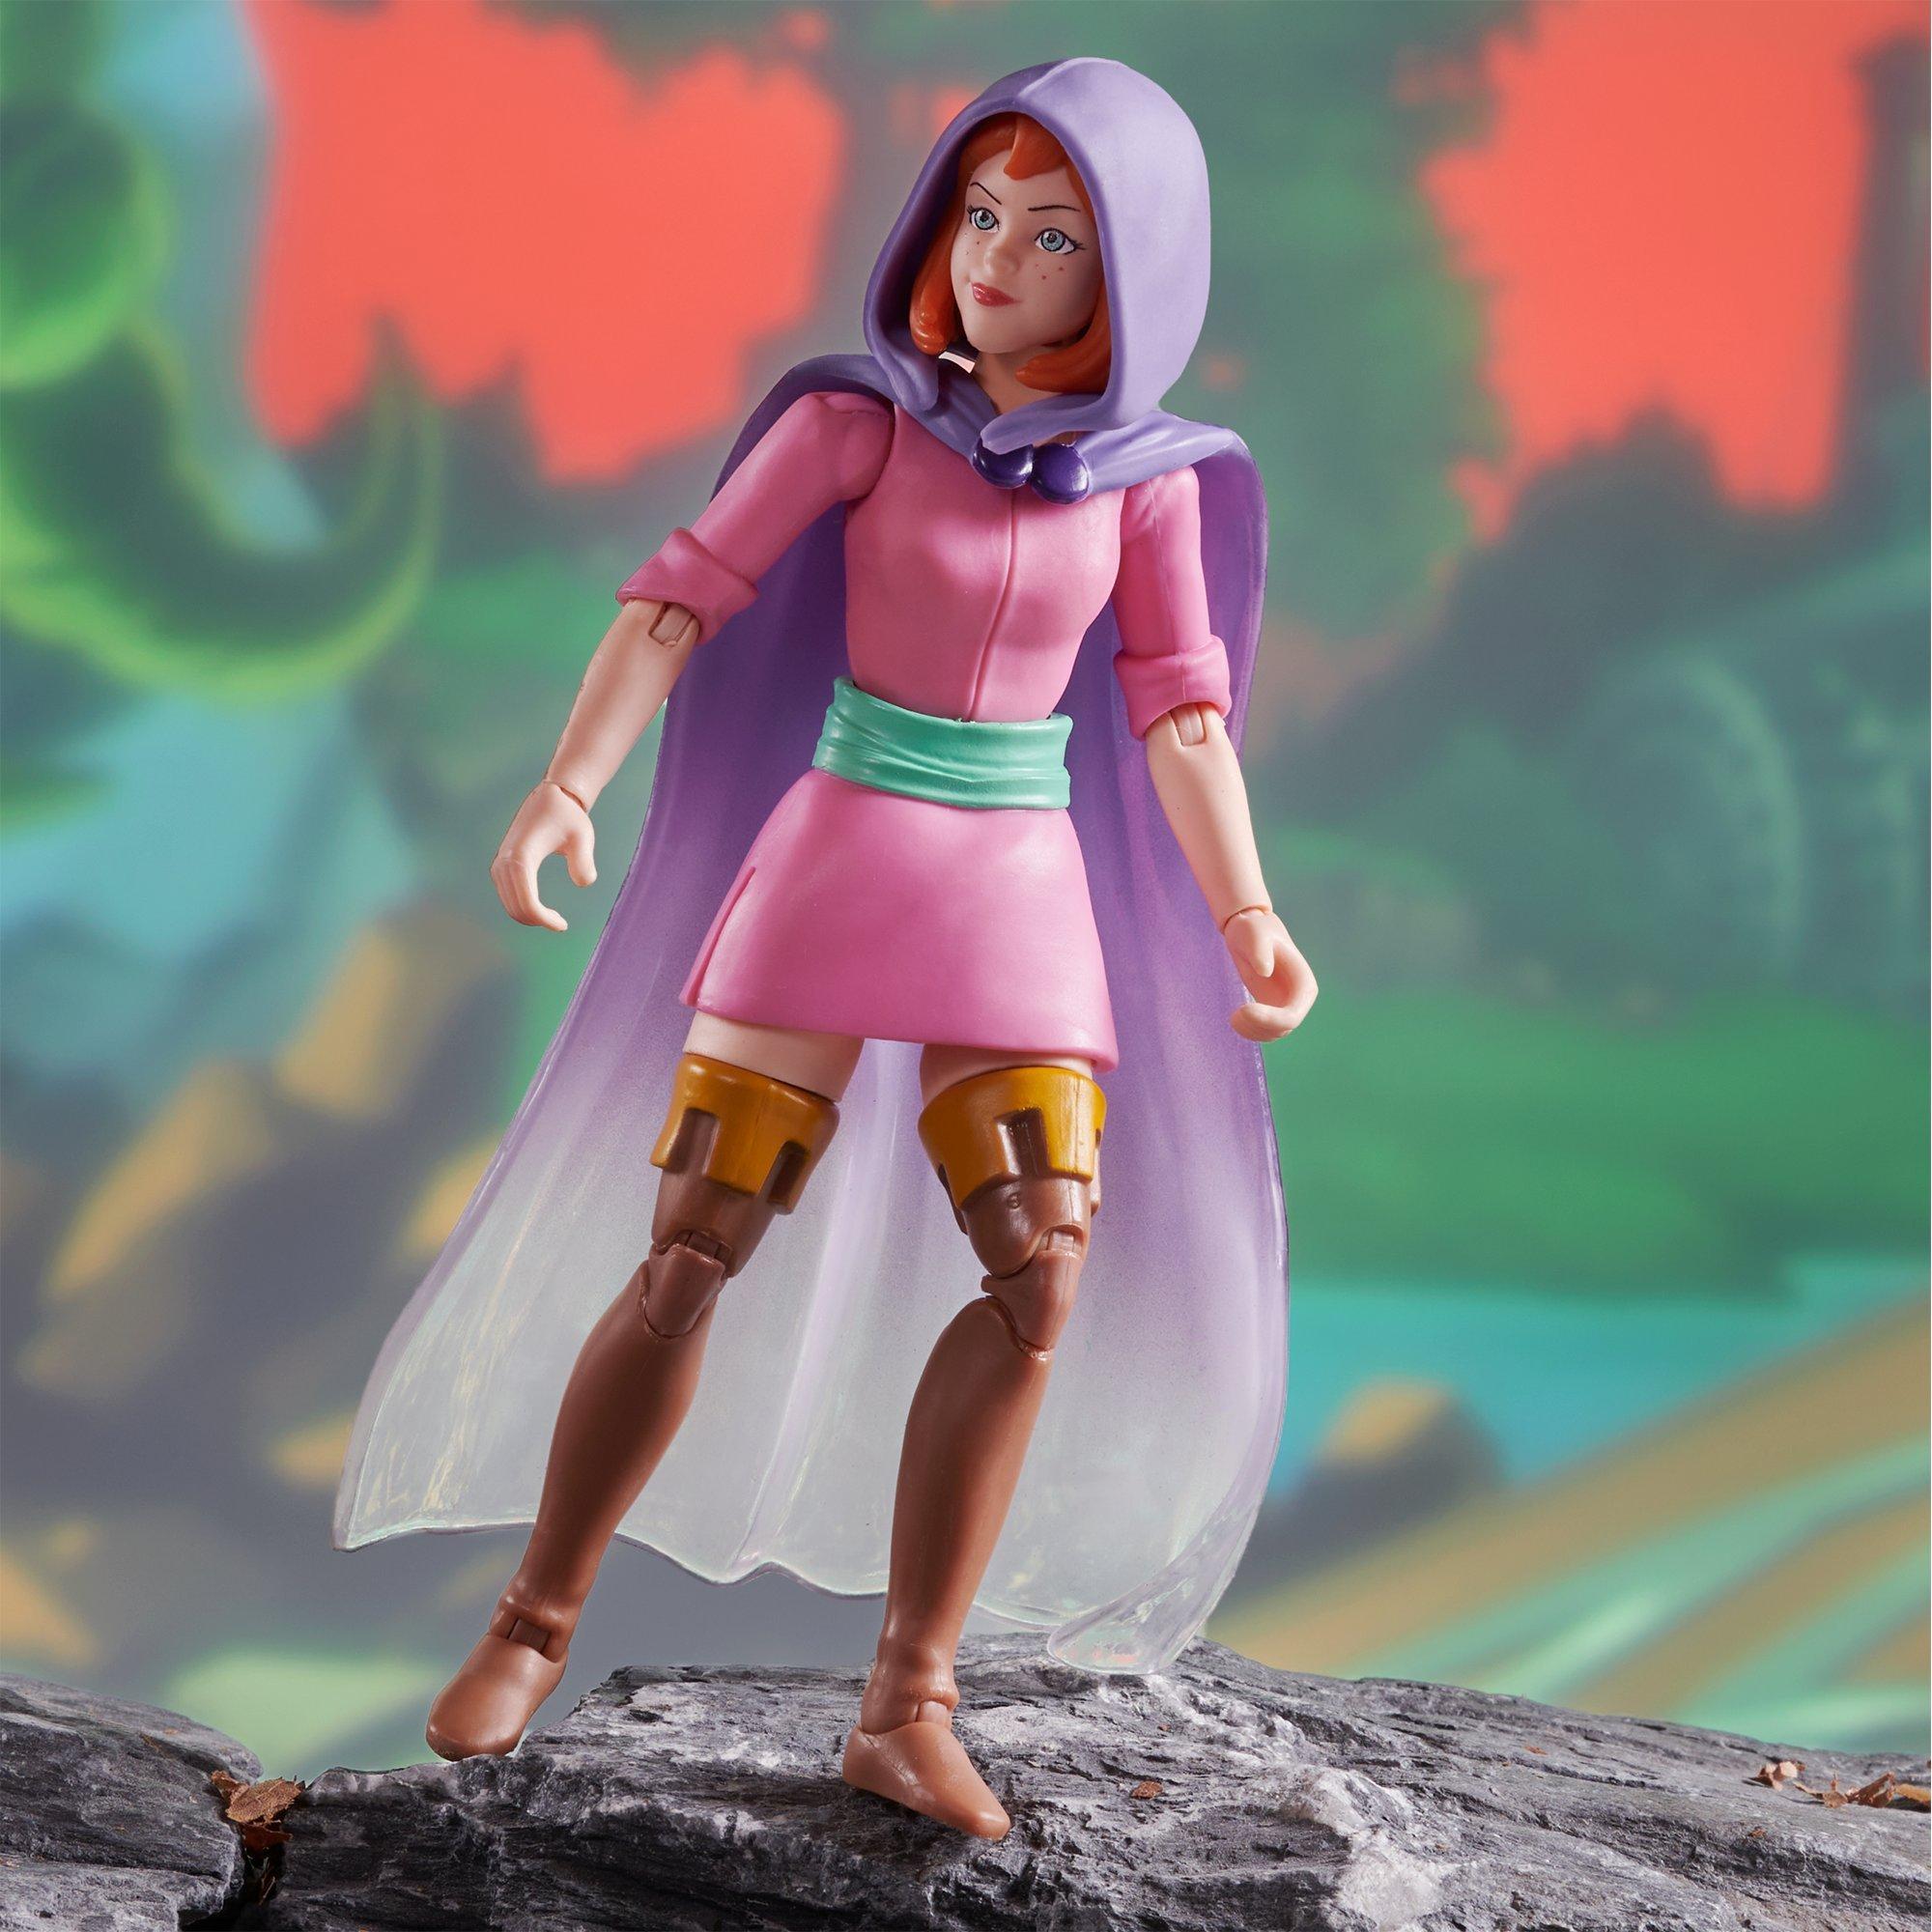 Hasbro Dungeons and Dragons Sheila 6-in Action Figure with d6 Die